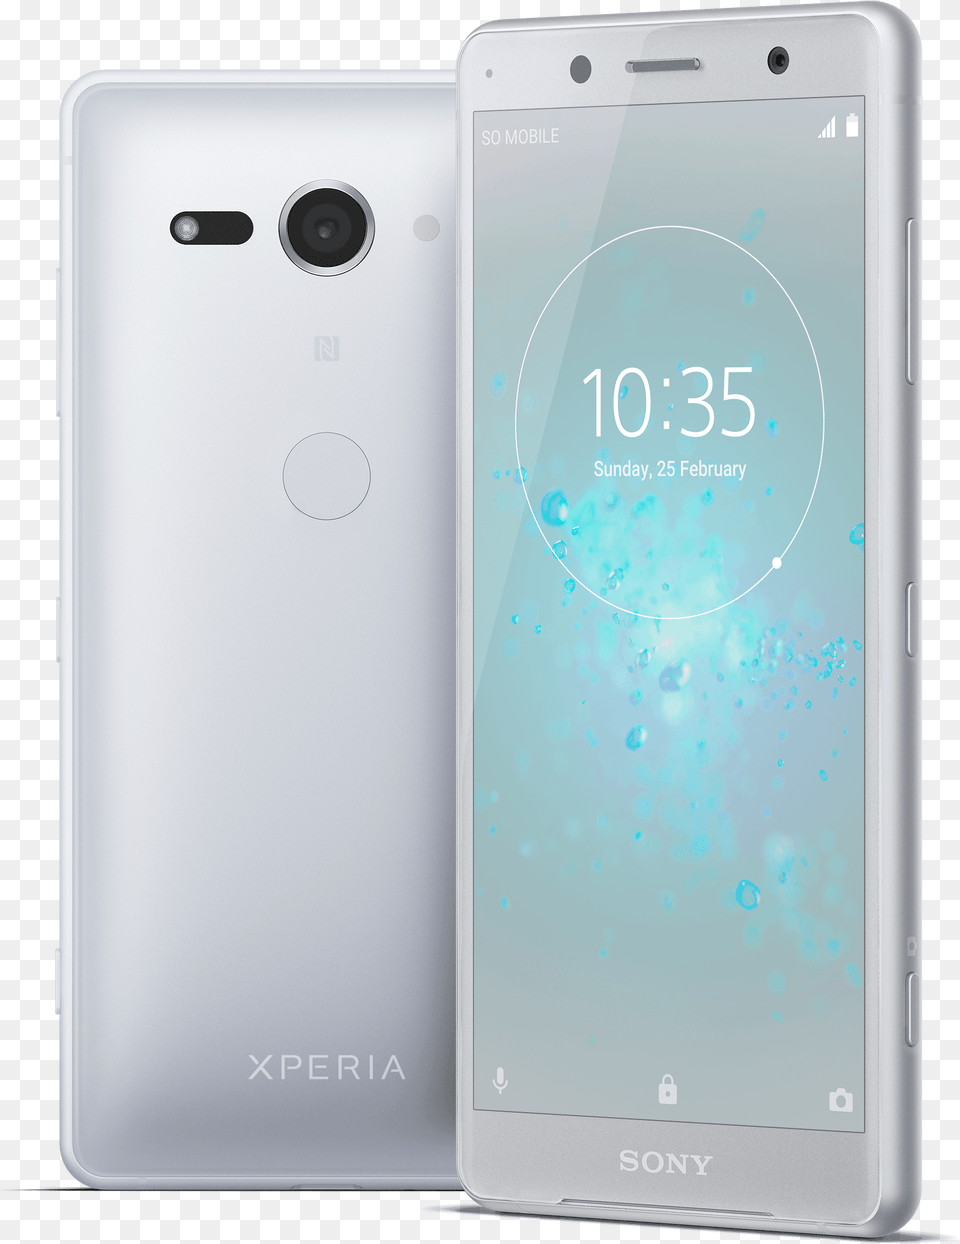 Sony Xperia Xz2 Vodafone, Electronics, Mobile Phone, Phone Png